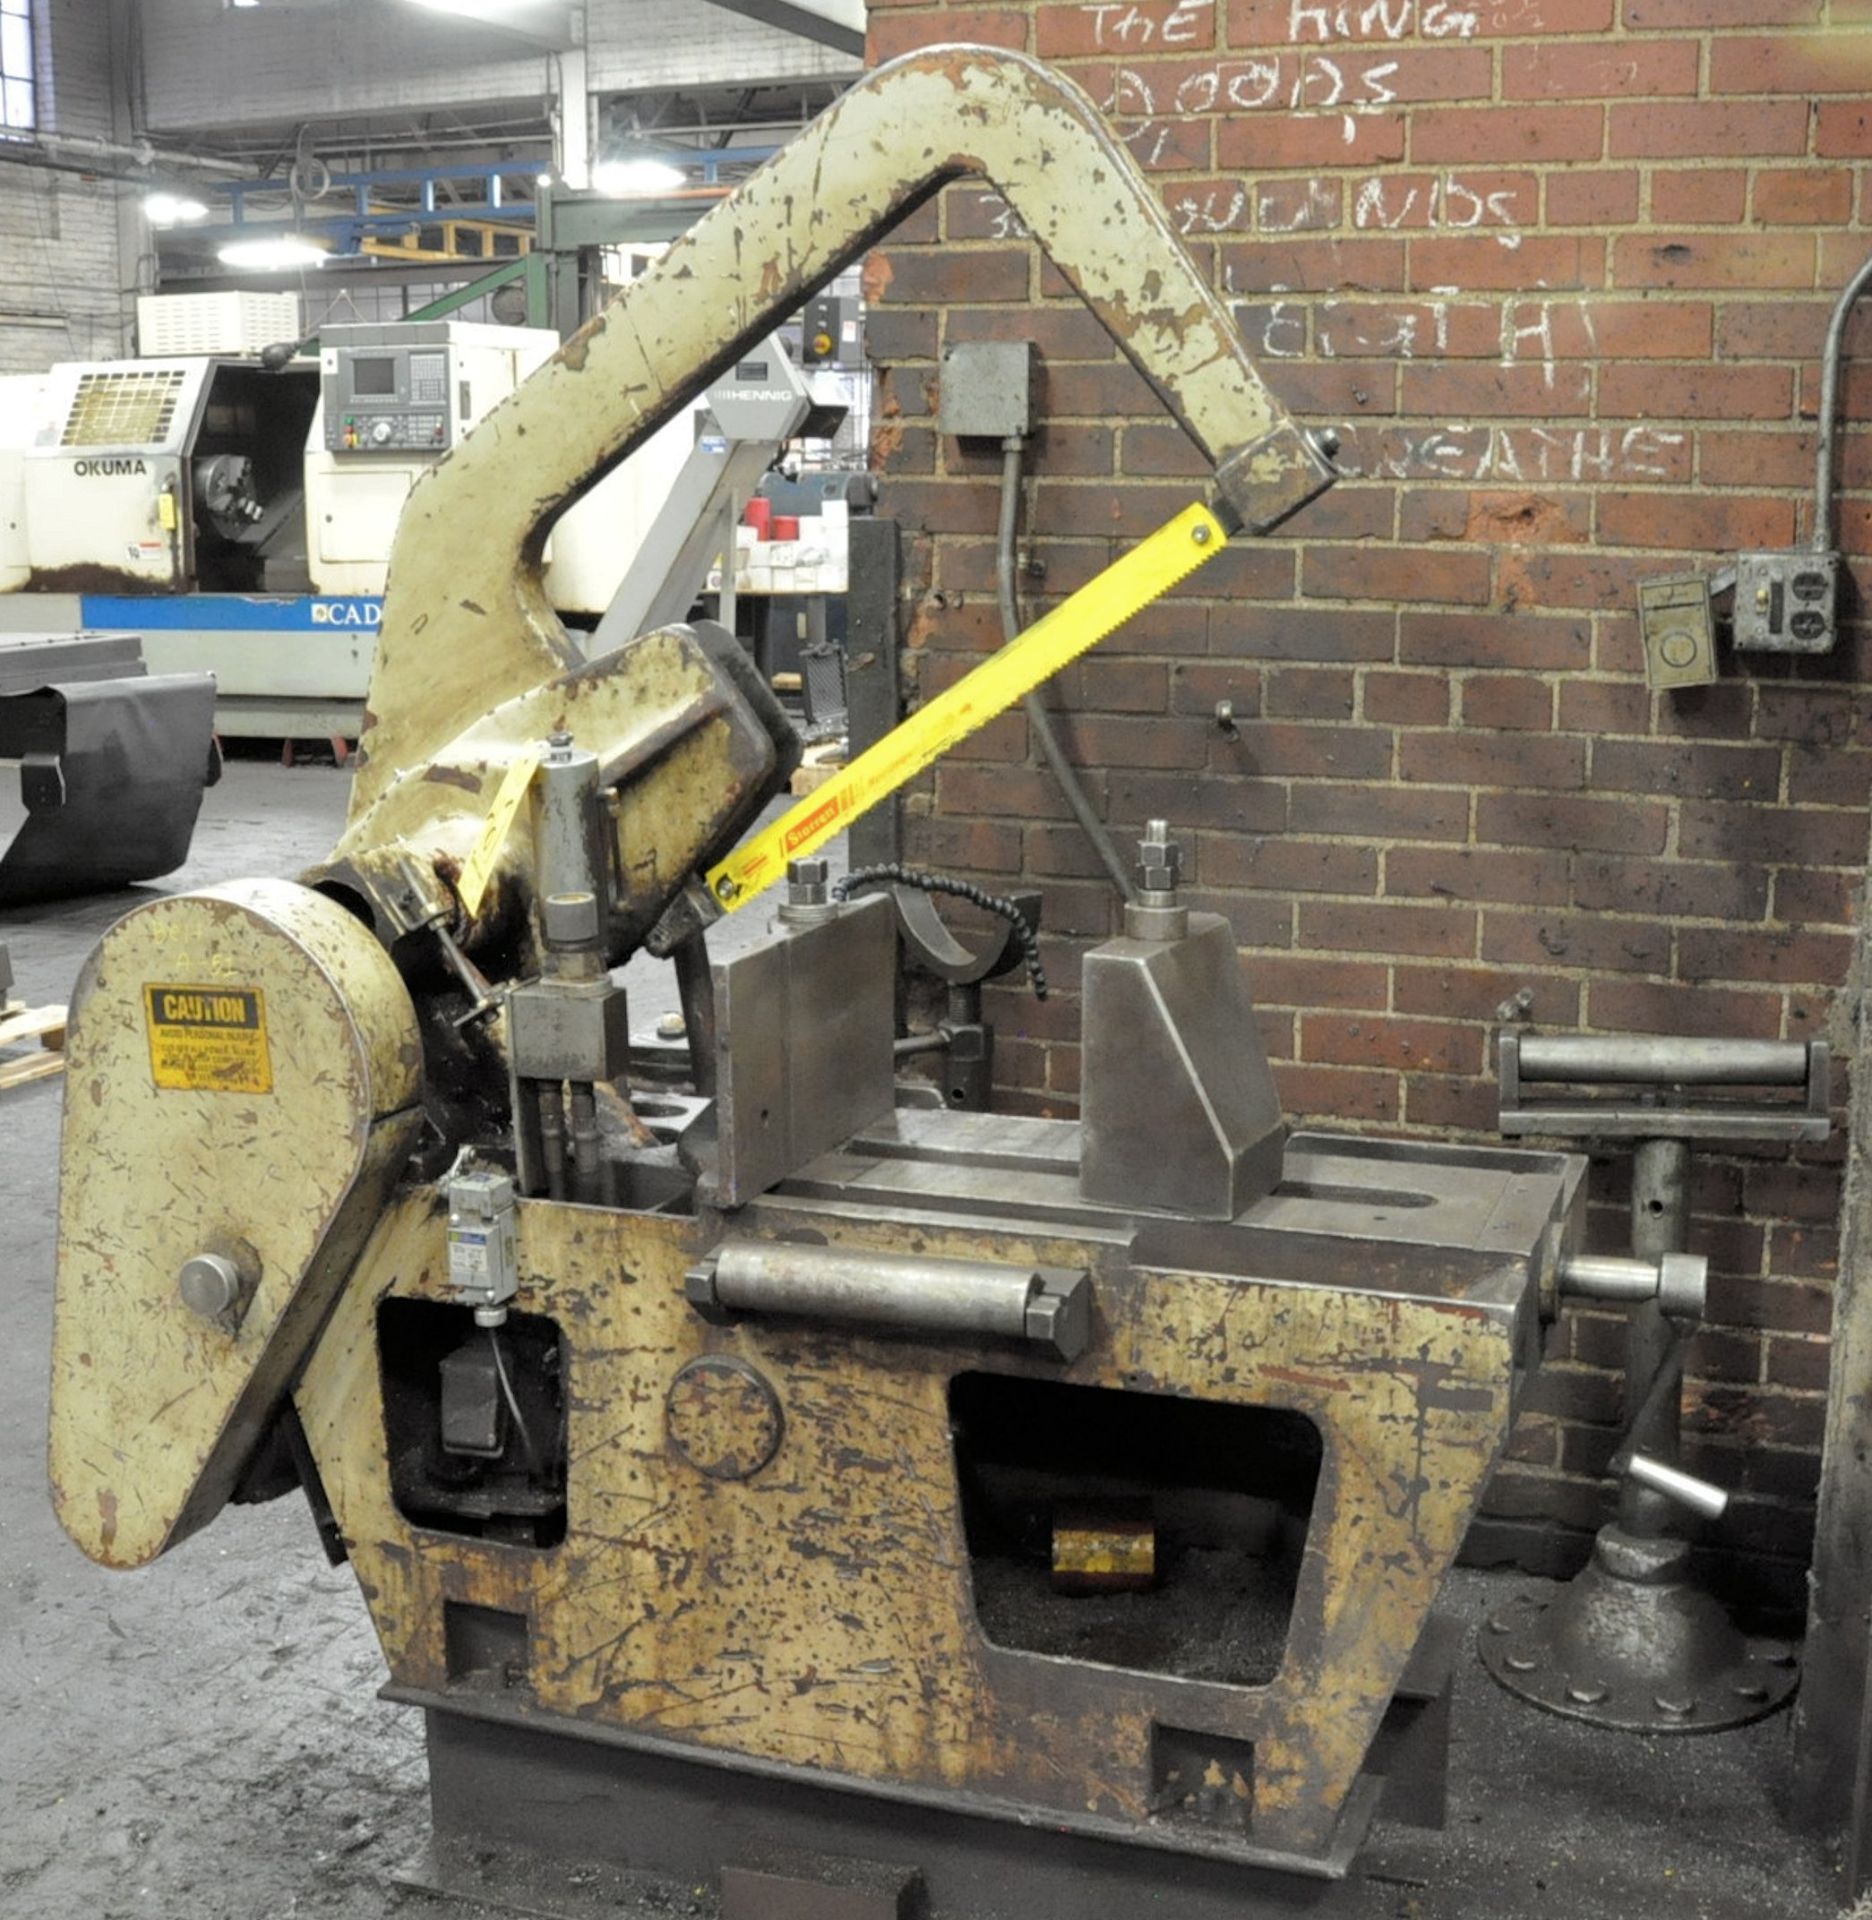 Peerless 20" Steel Cutting Power Hack Saw Machine, s/n Unknown, with Roller Feed Stock Stand